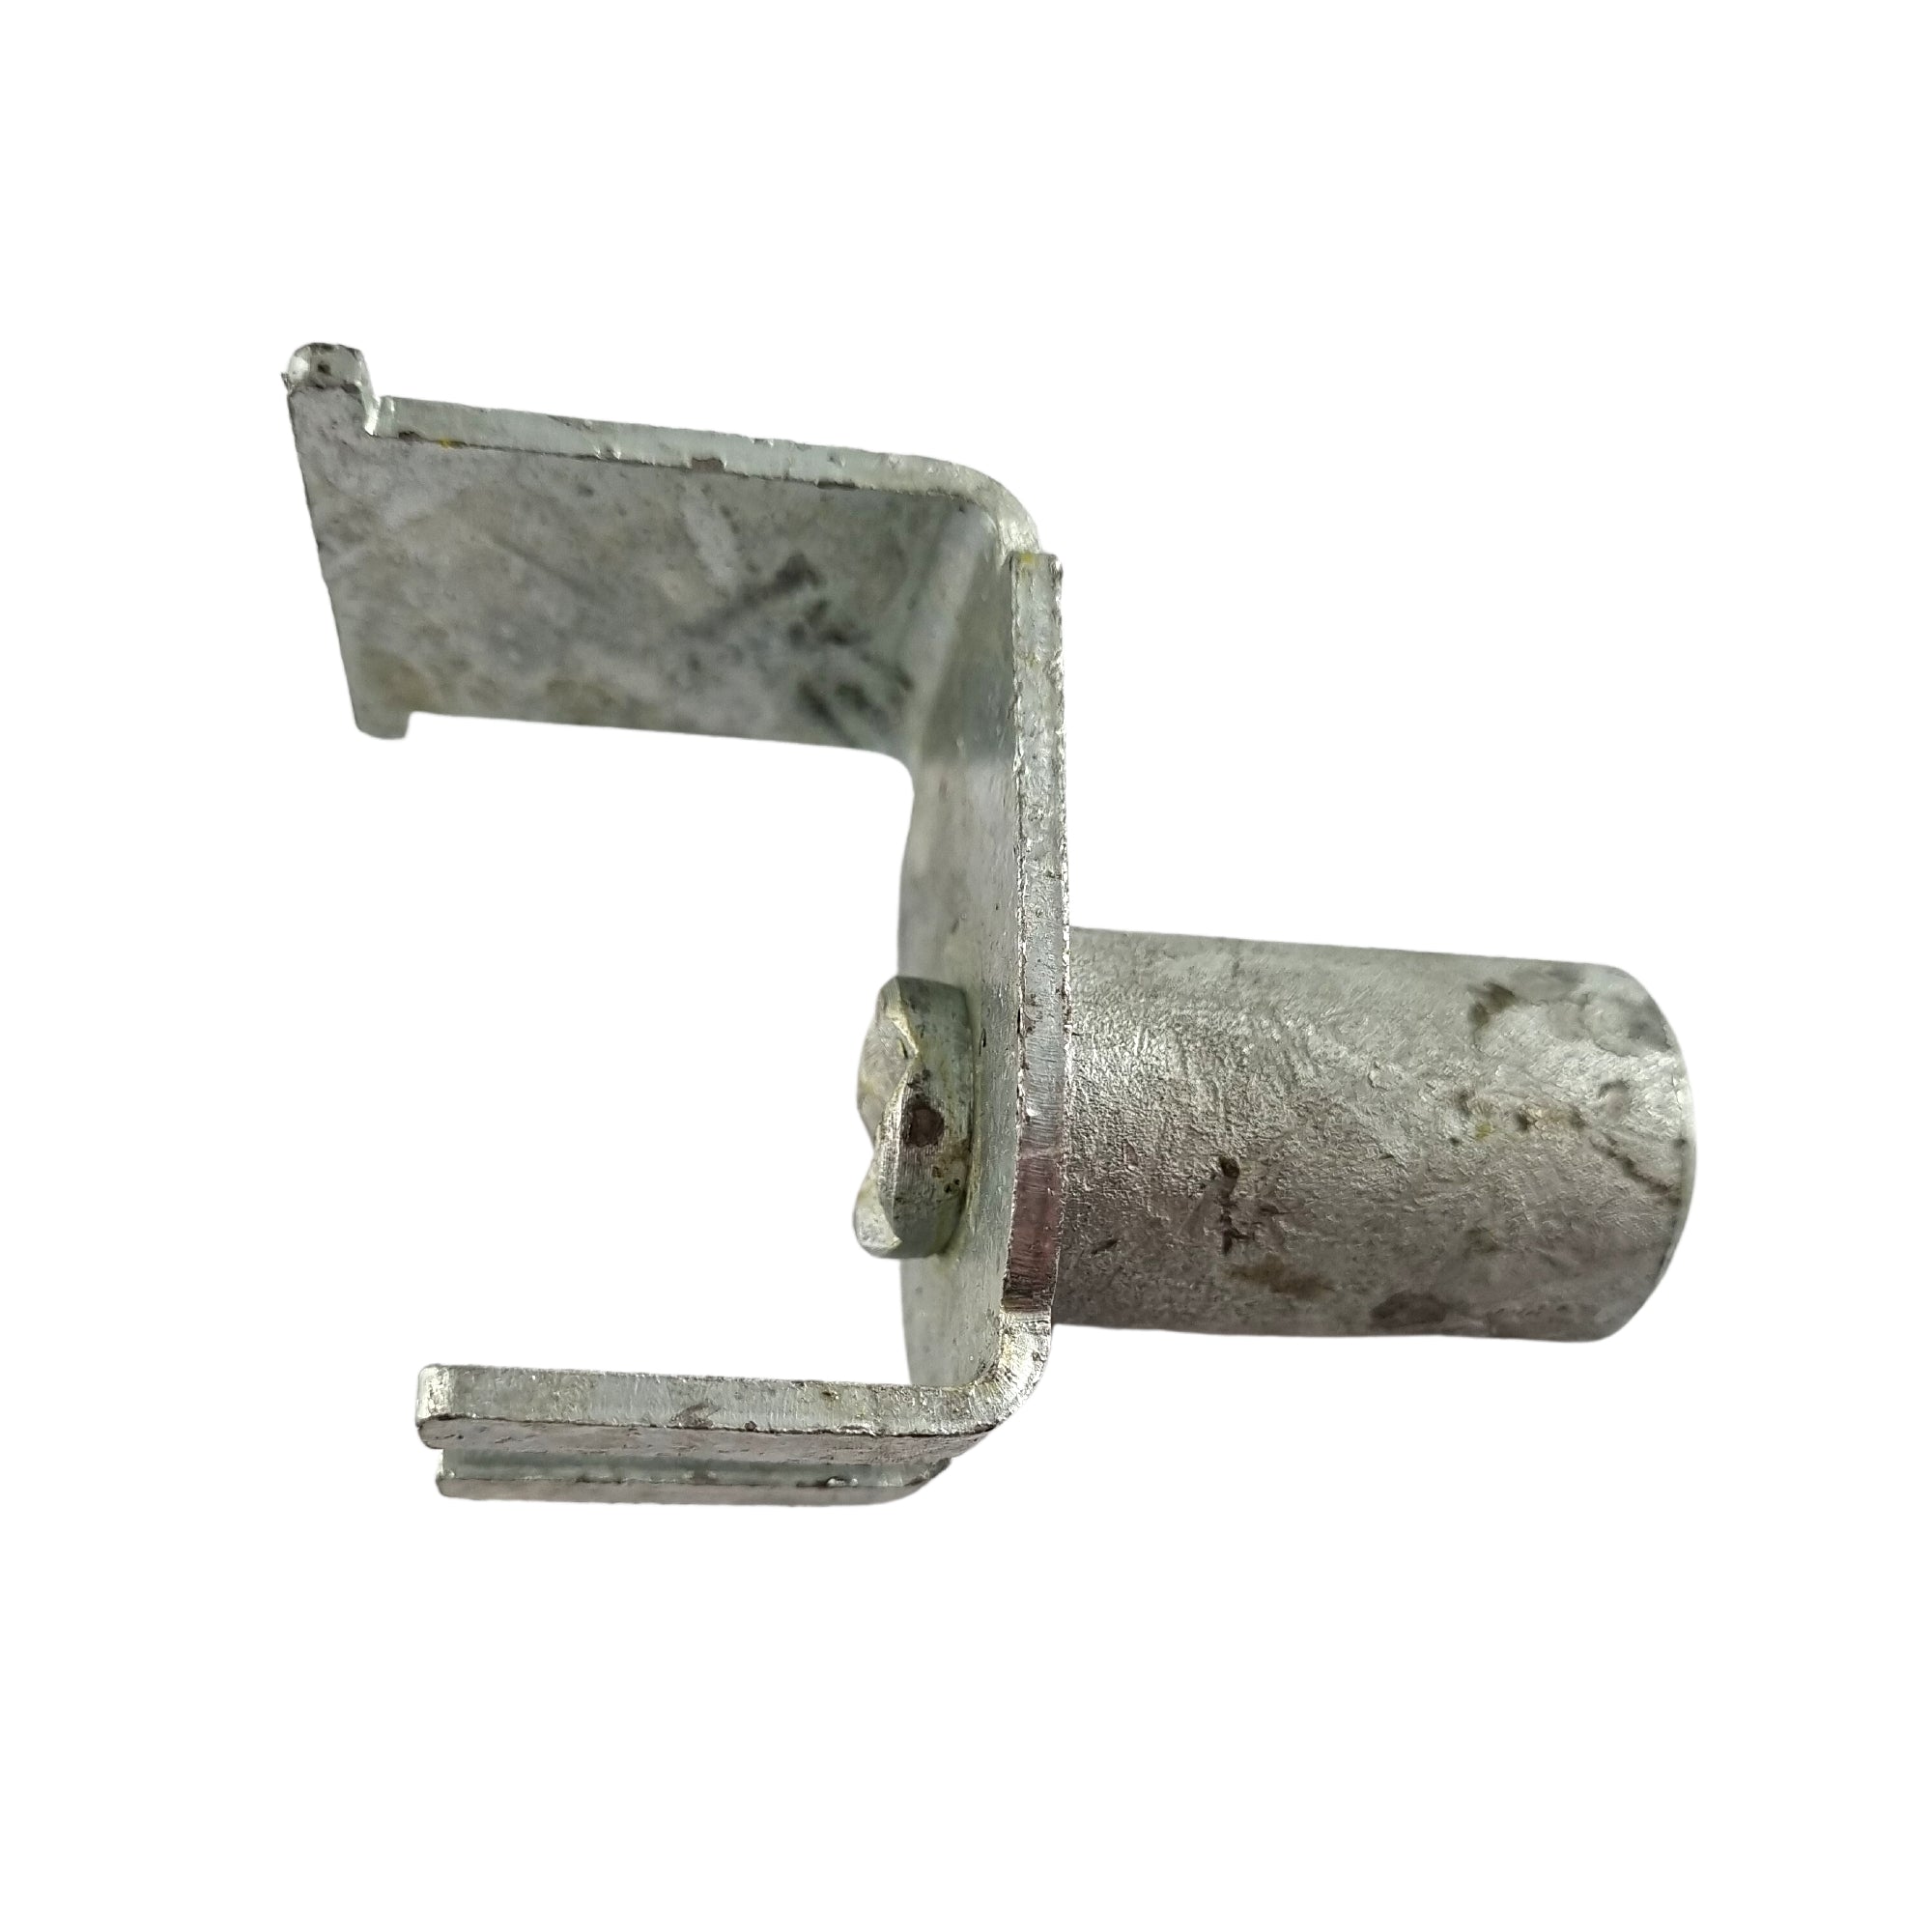 Gudgeon Attachment for Two Part Hinge - Galvanised. Australian made. Shop fence and gate fittings online - chain.com.au. Australia wide shipping.